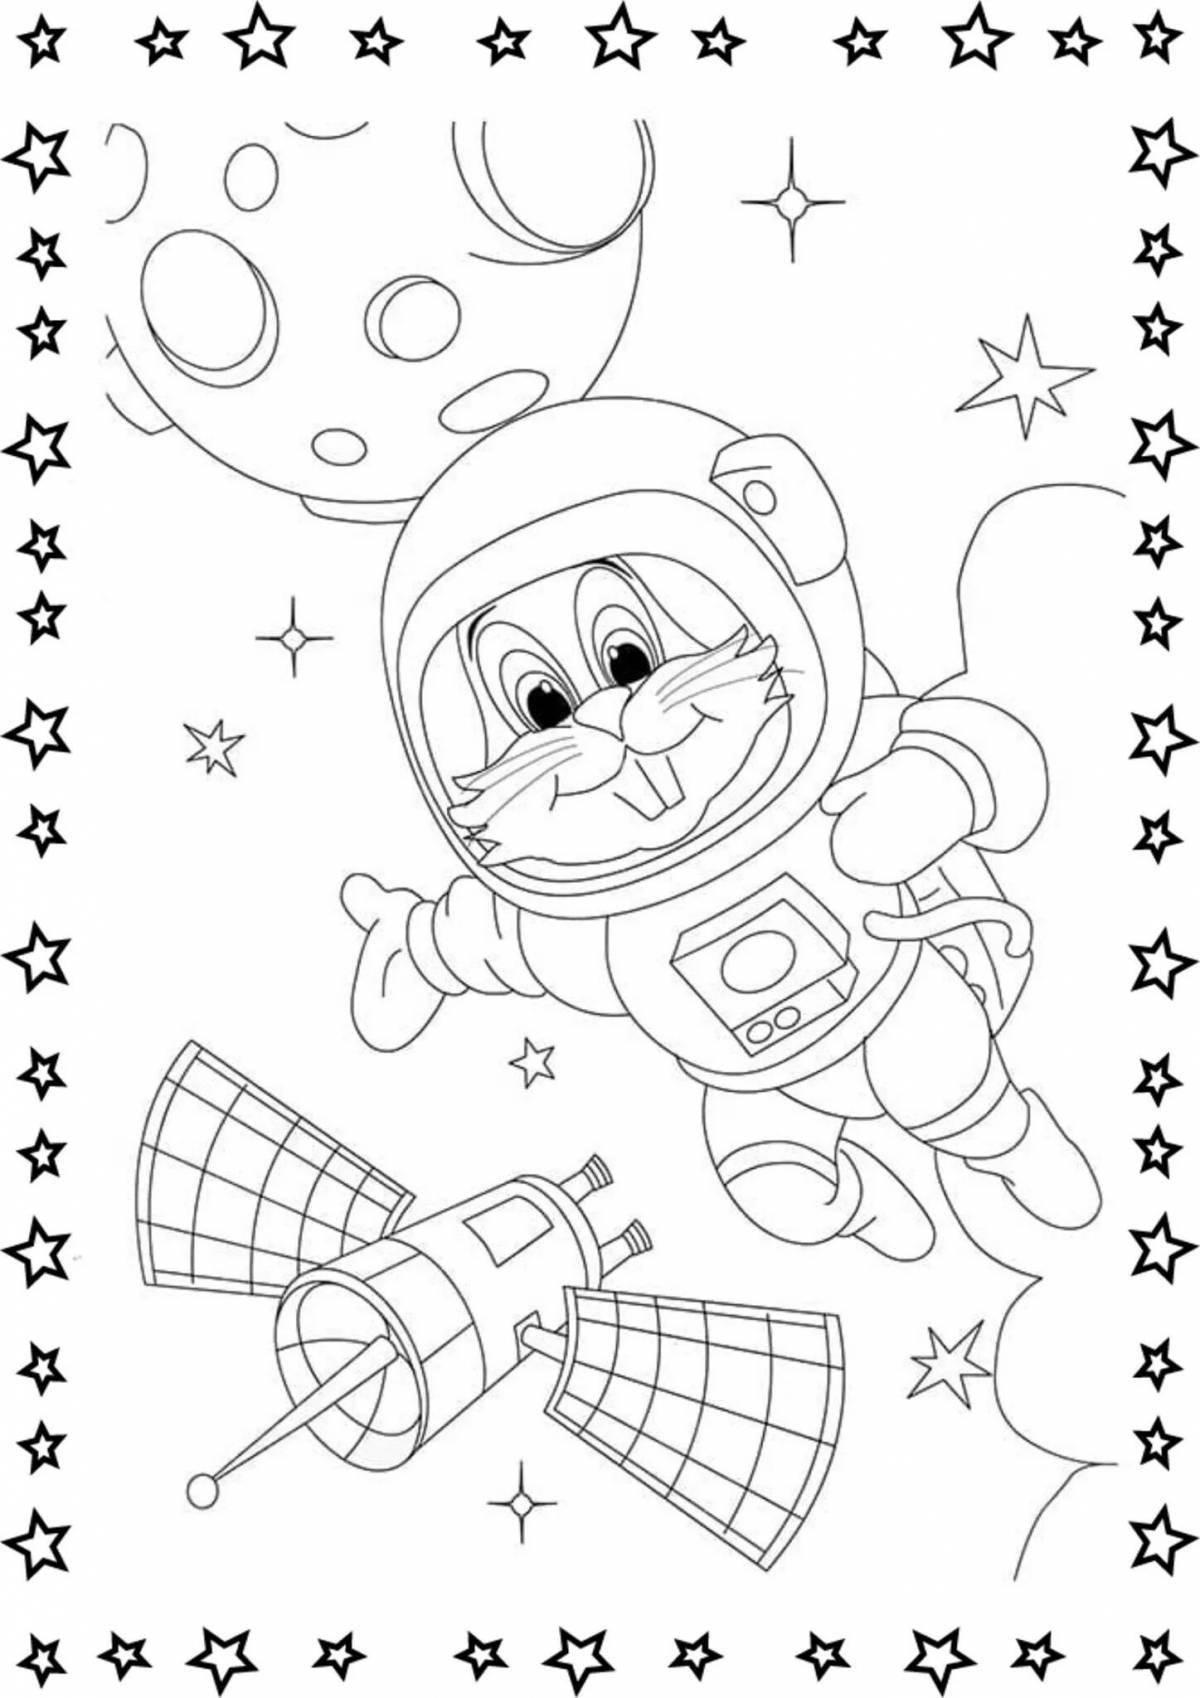 Coloring page glowing astronaut with space probe